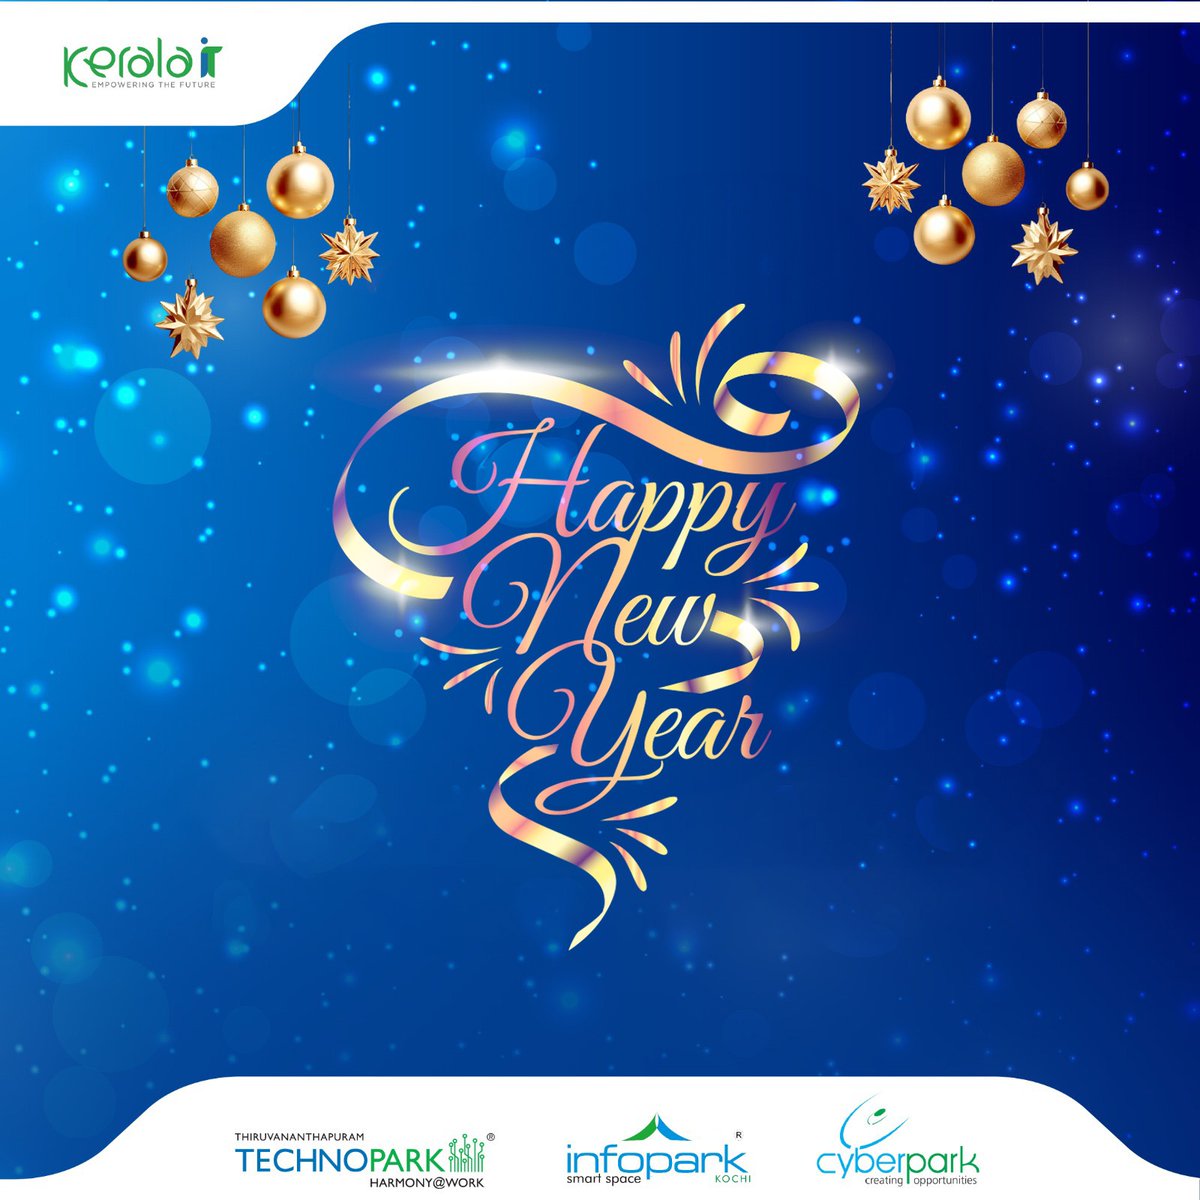 Let’s ring in the New Year with a lot of innovation and excitement. Happy New Year!

#CyberparkKozhikode #Kozhikode #Calicut #KeralaITParks #HappyNewYear #NewYear2024 #Innovation